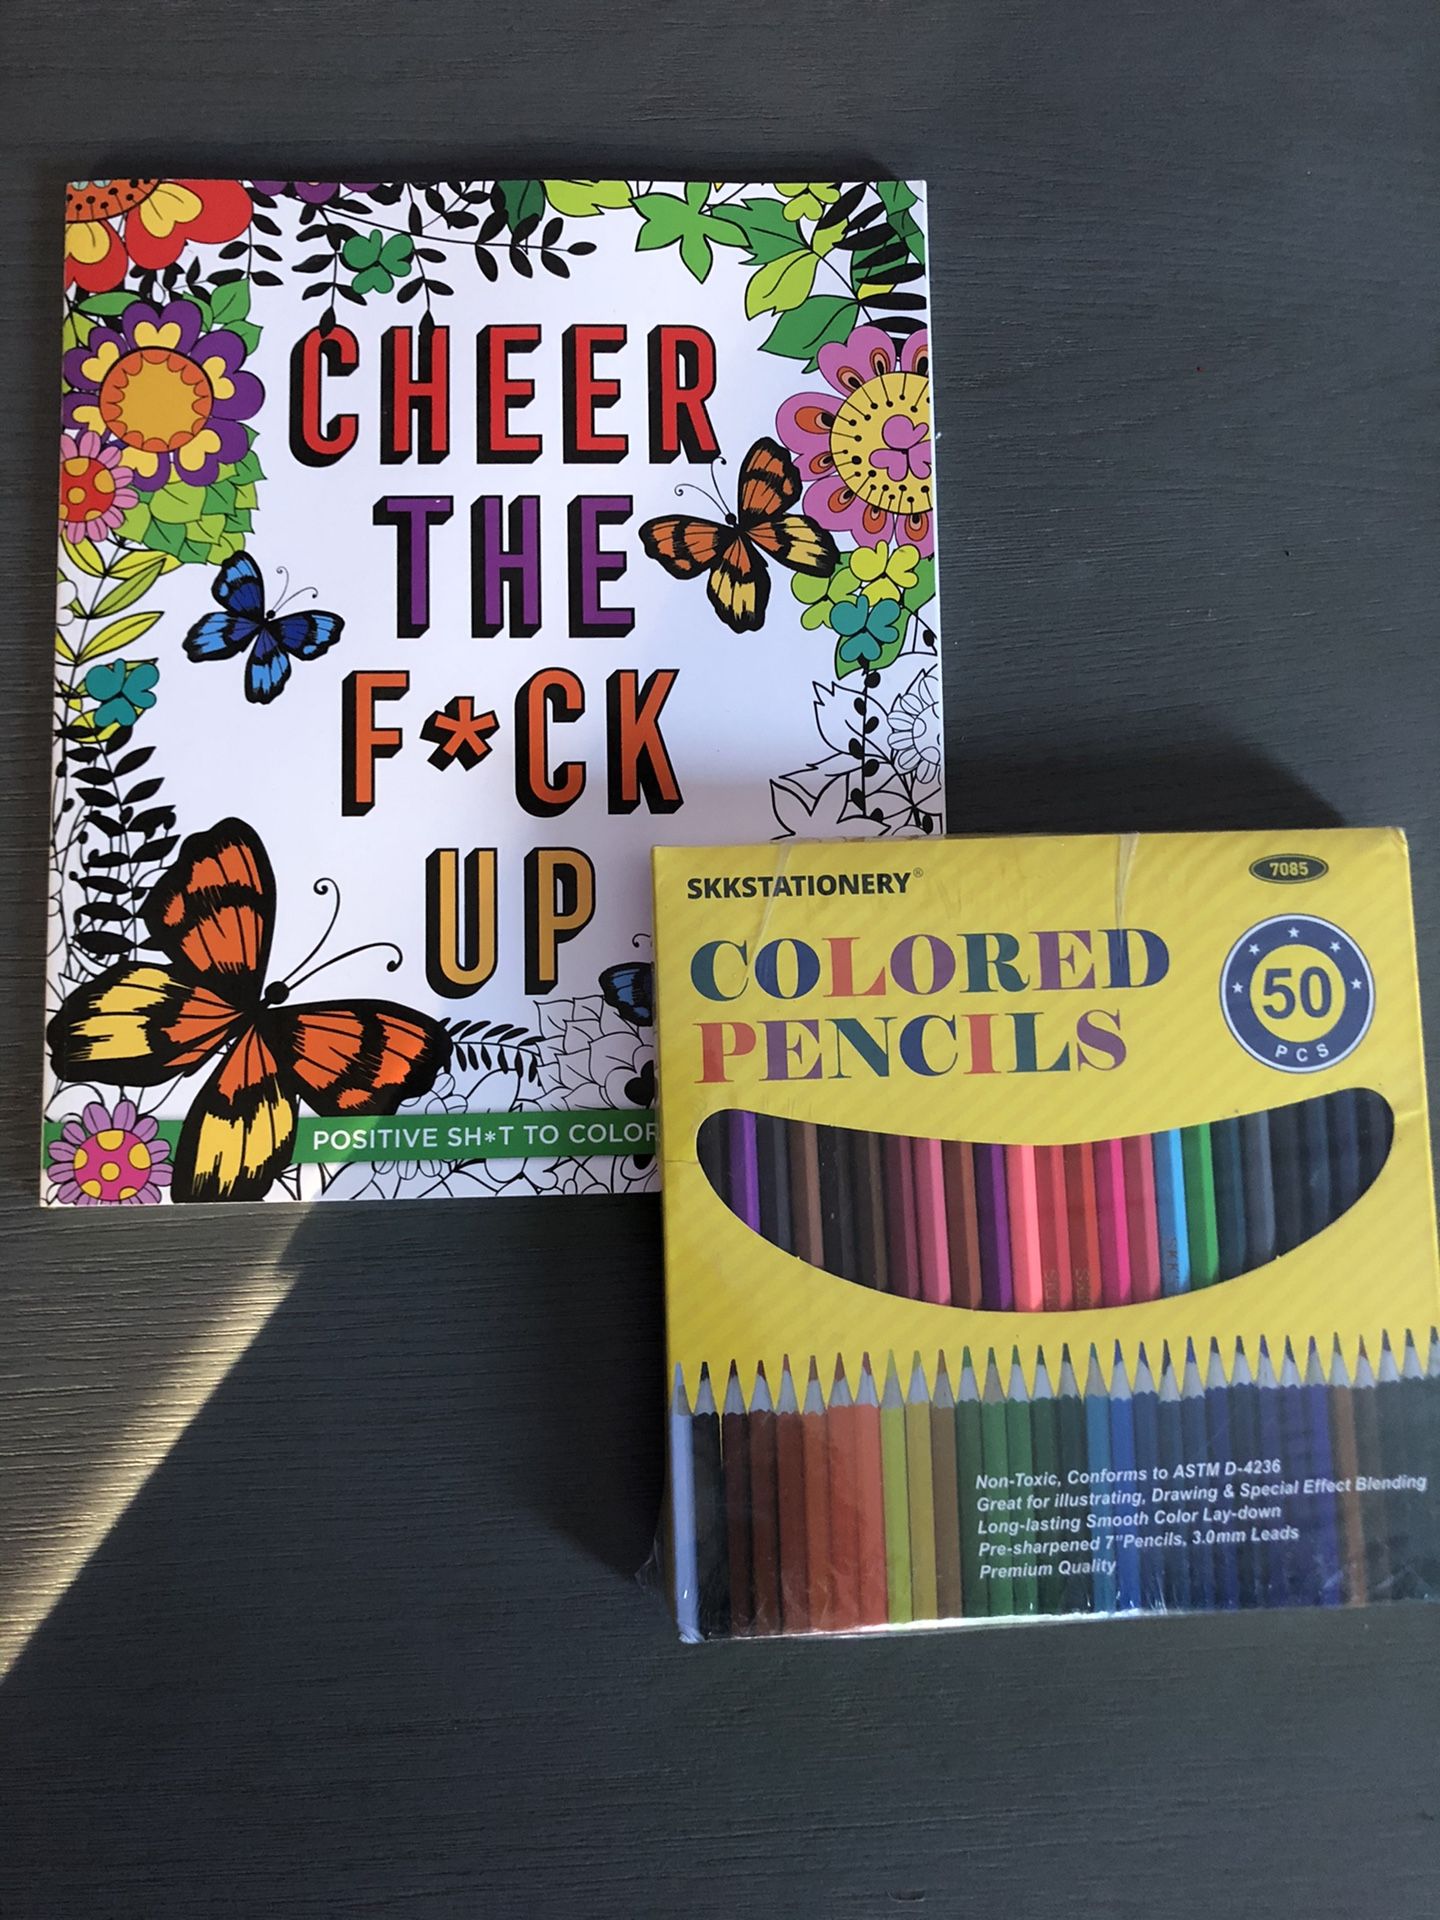 Adult Coloring Book & Colored Pencils